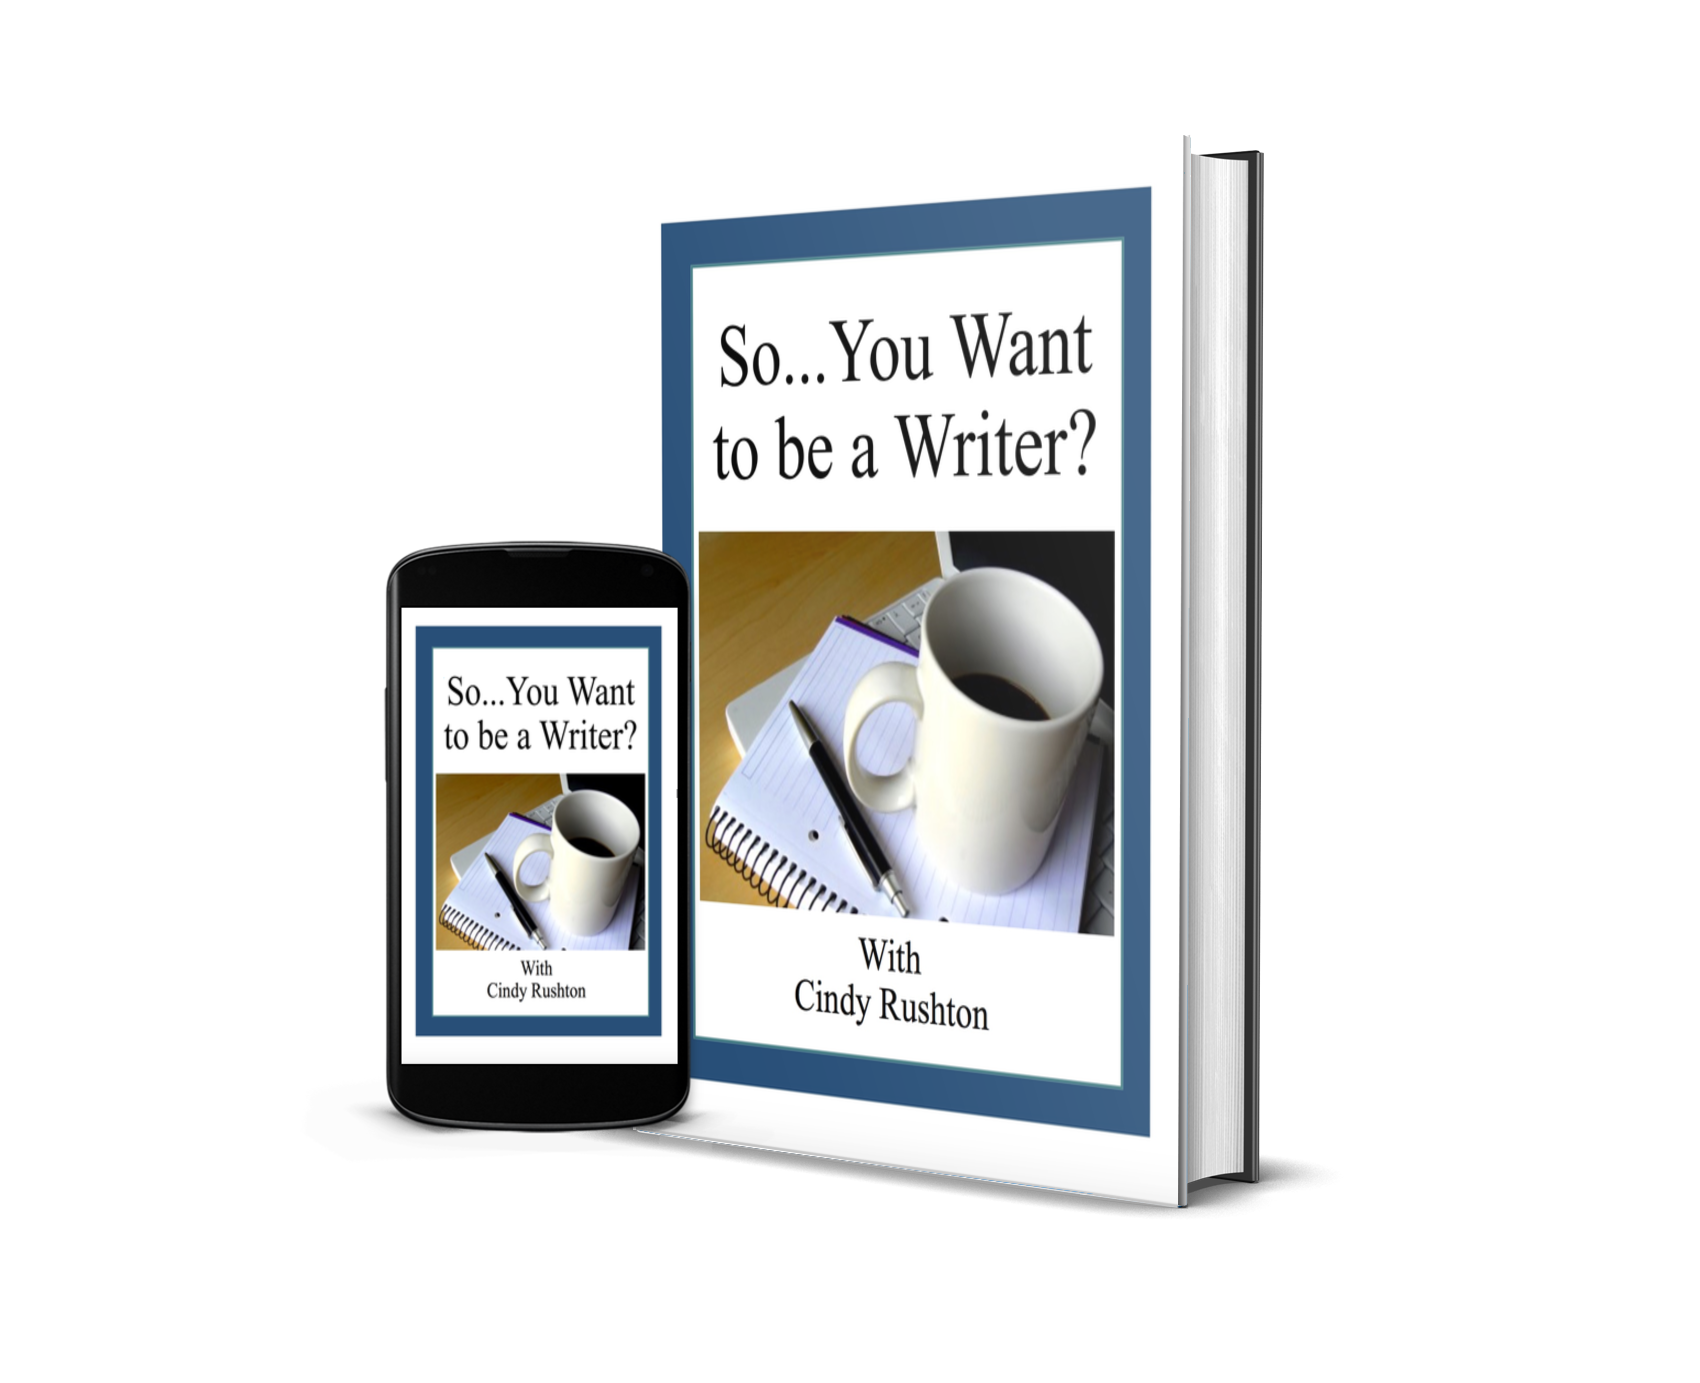 So...You Want to be a Writer???